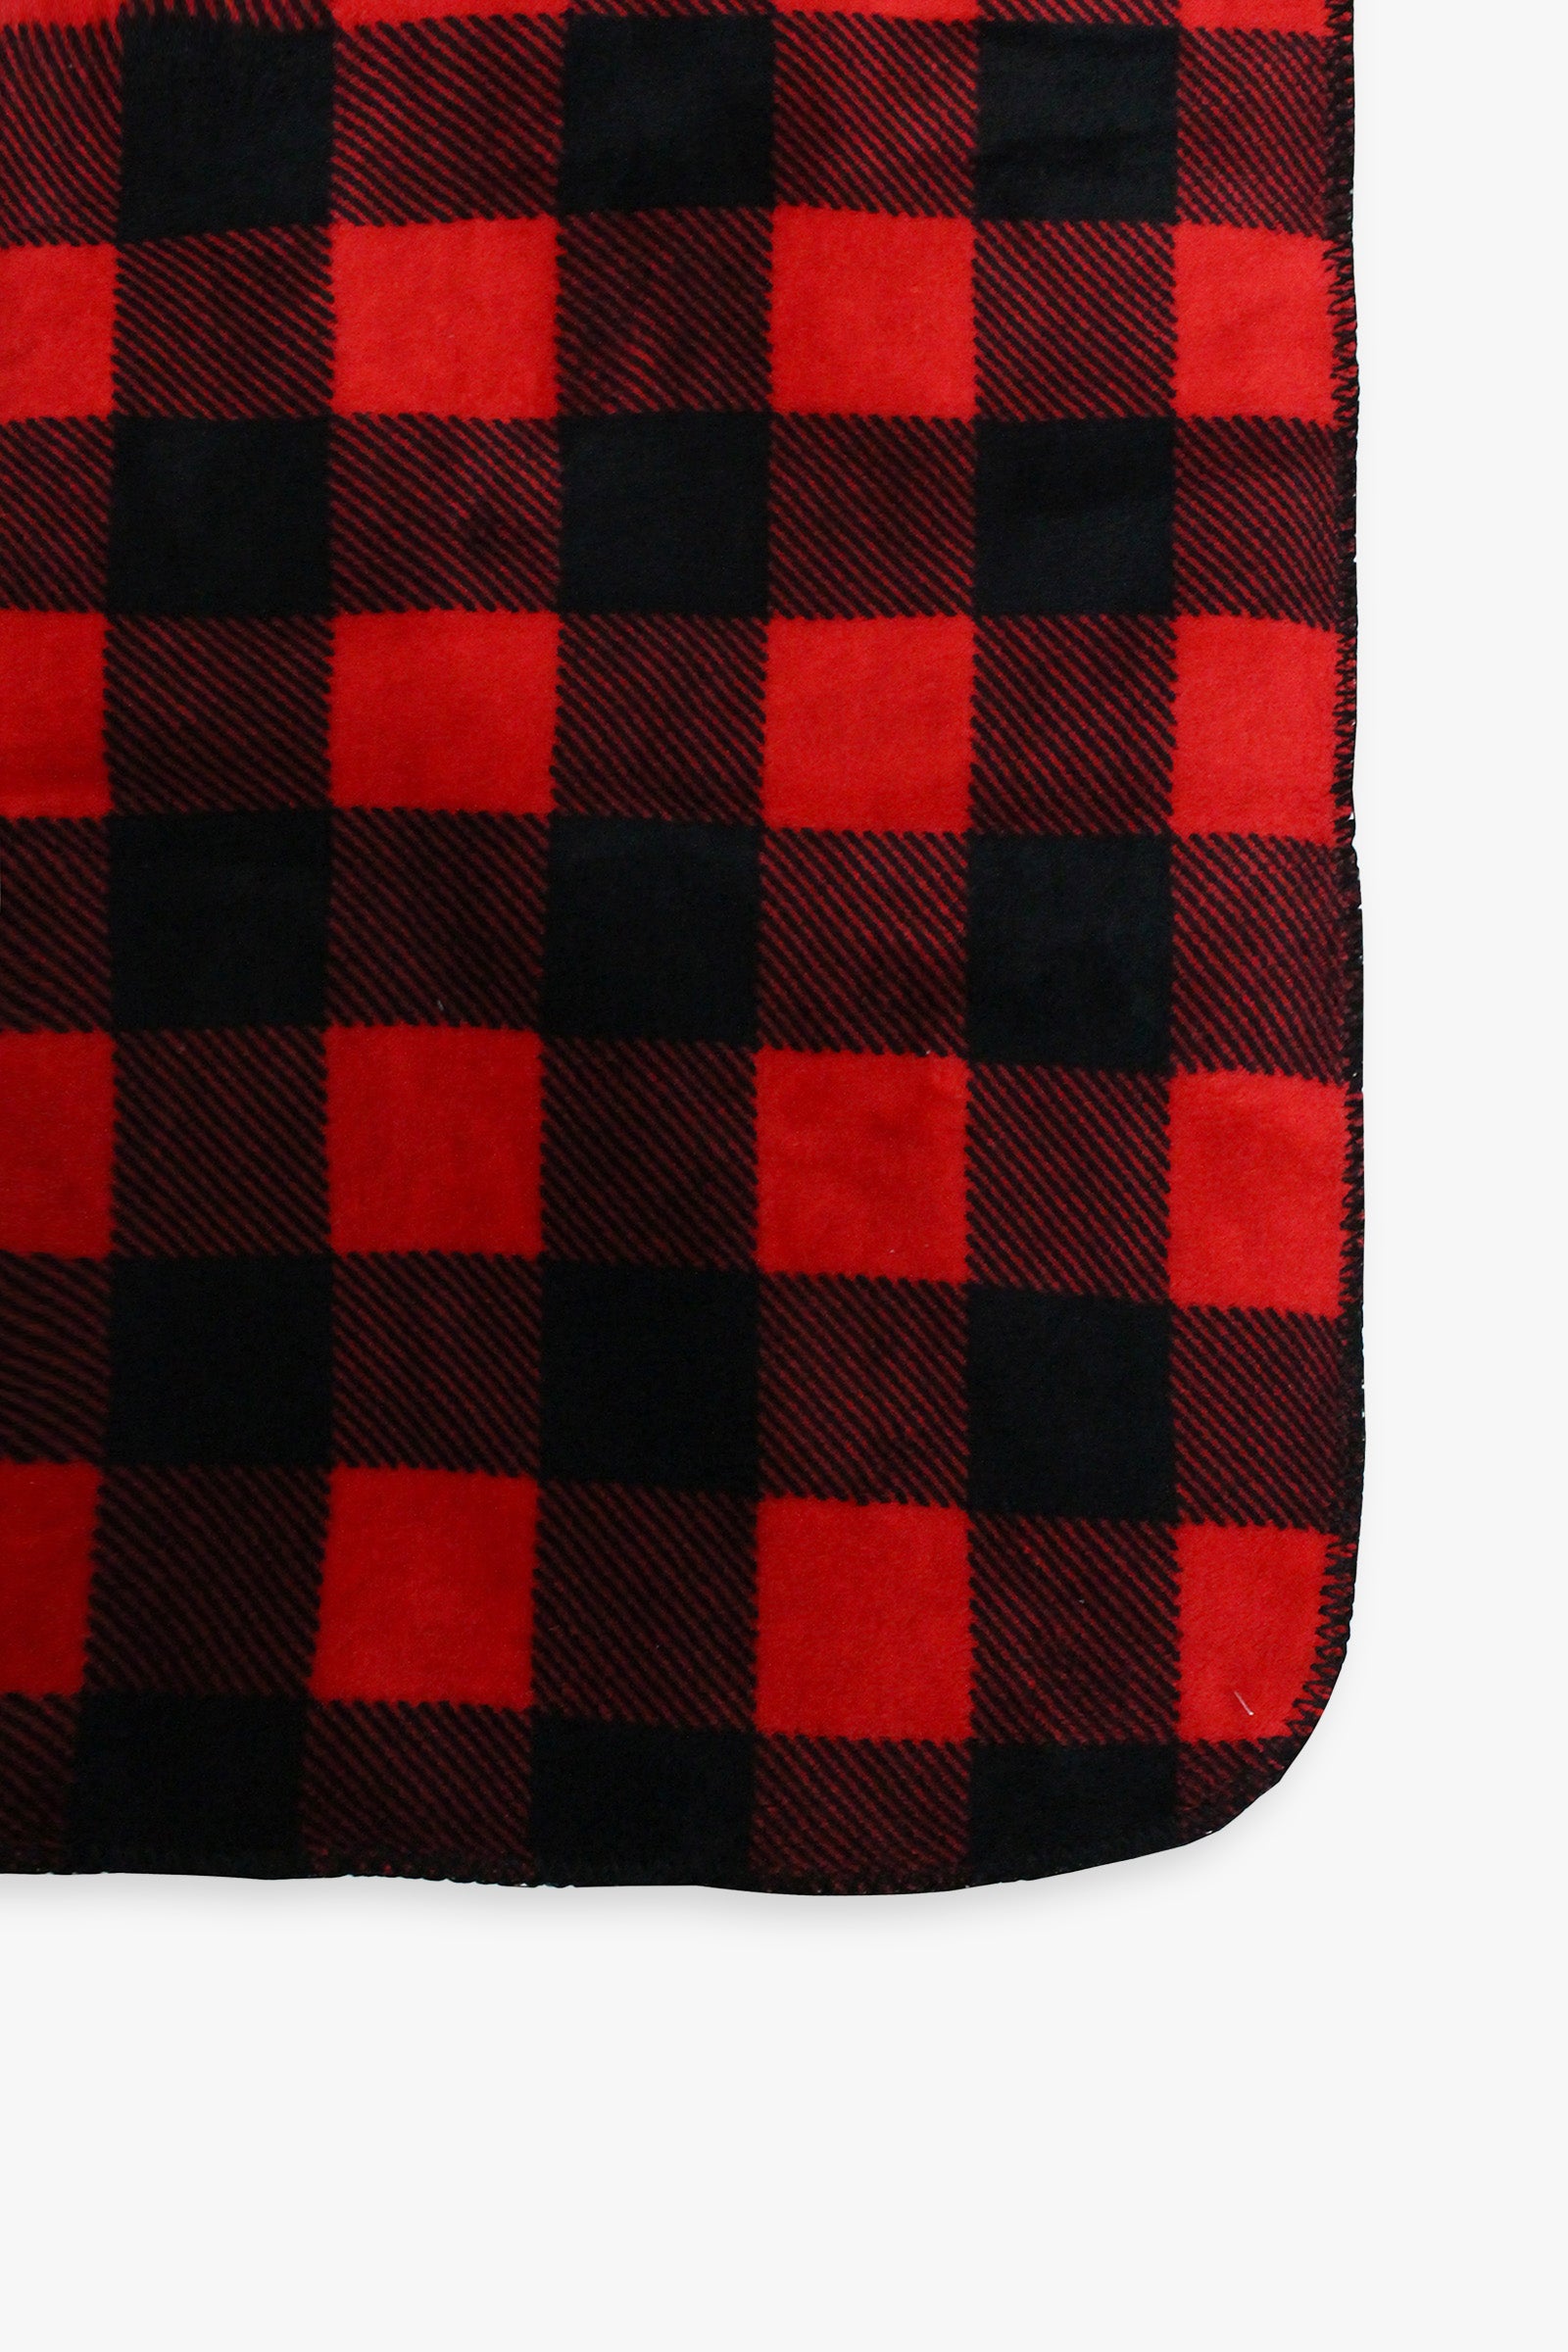 Great Northern Red & Black Buffalo Plaid Sherpa Lined Throw